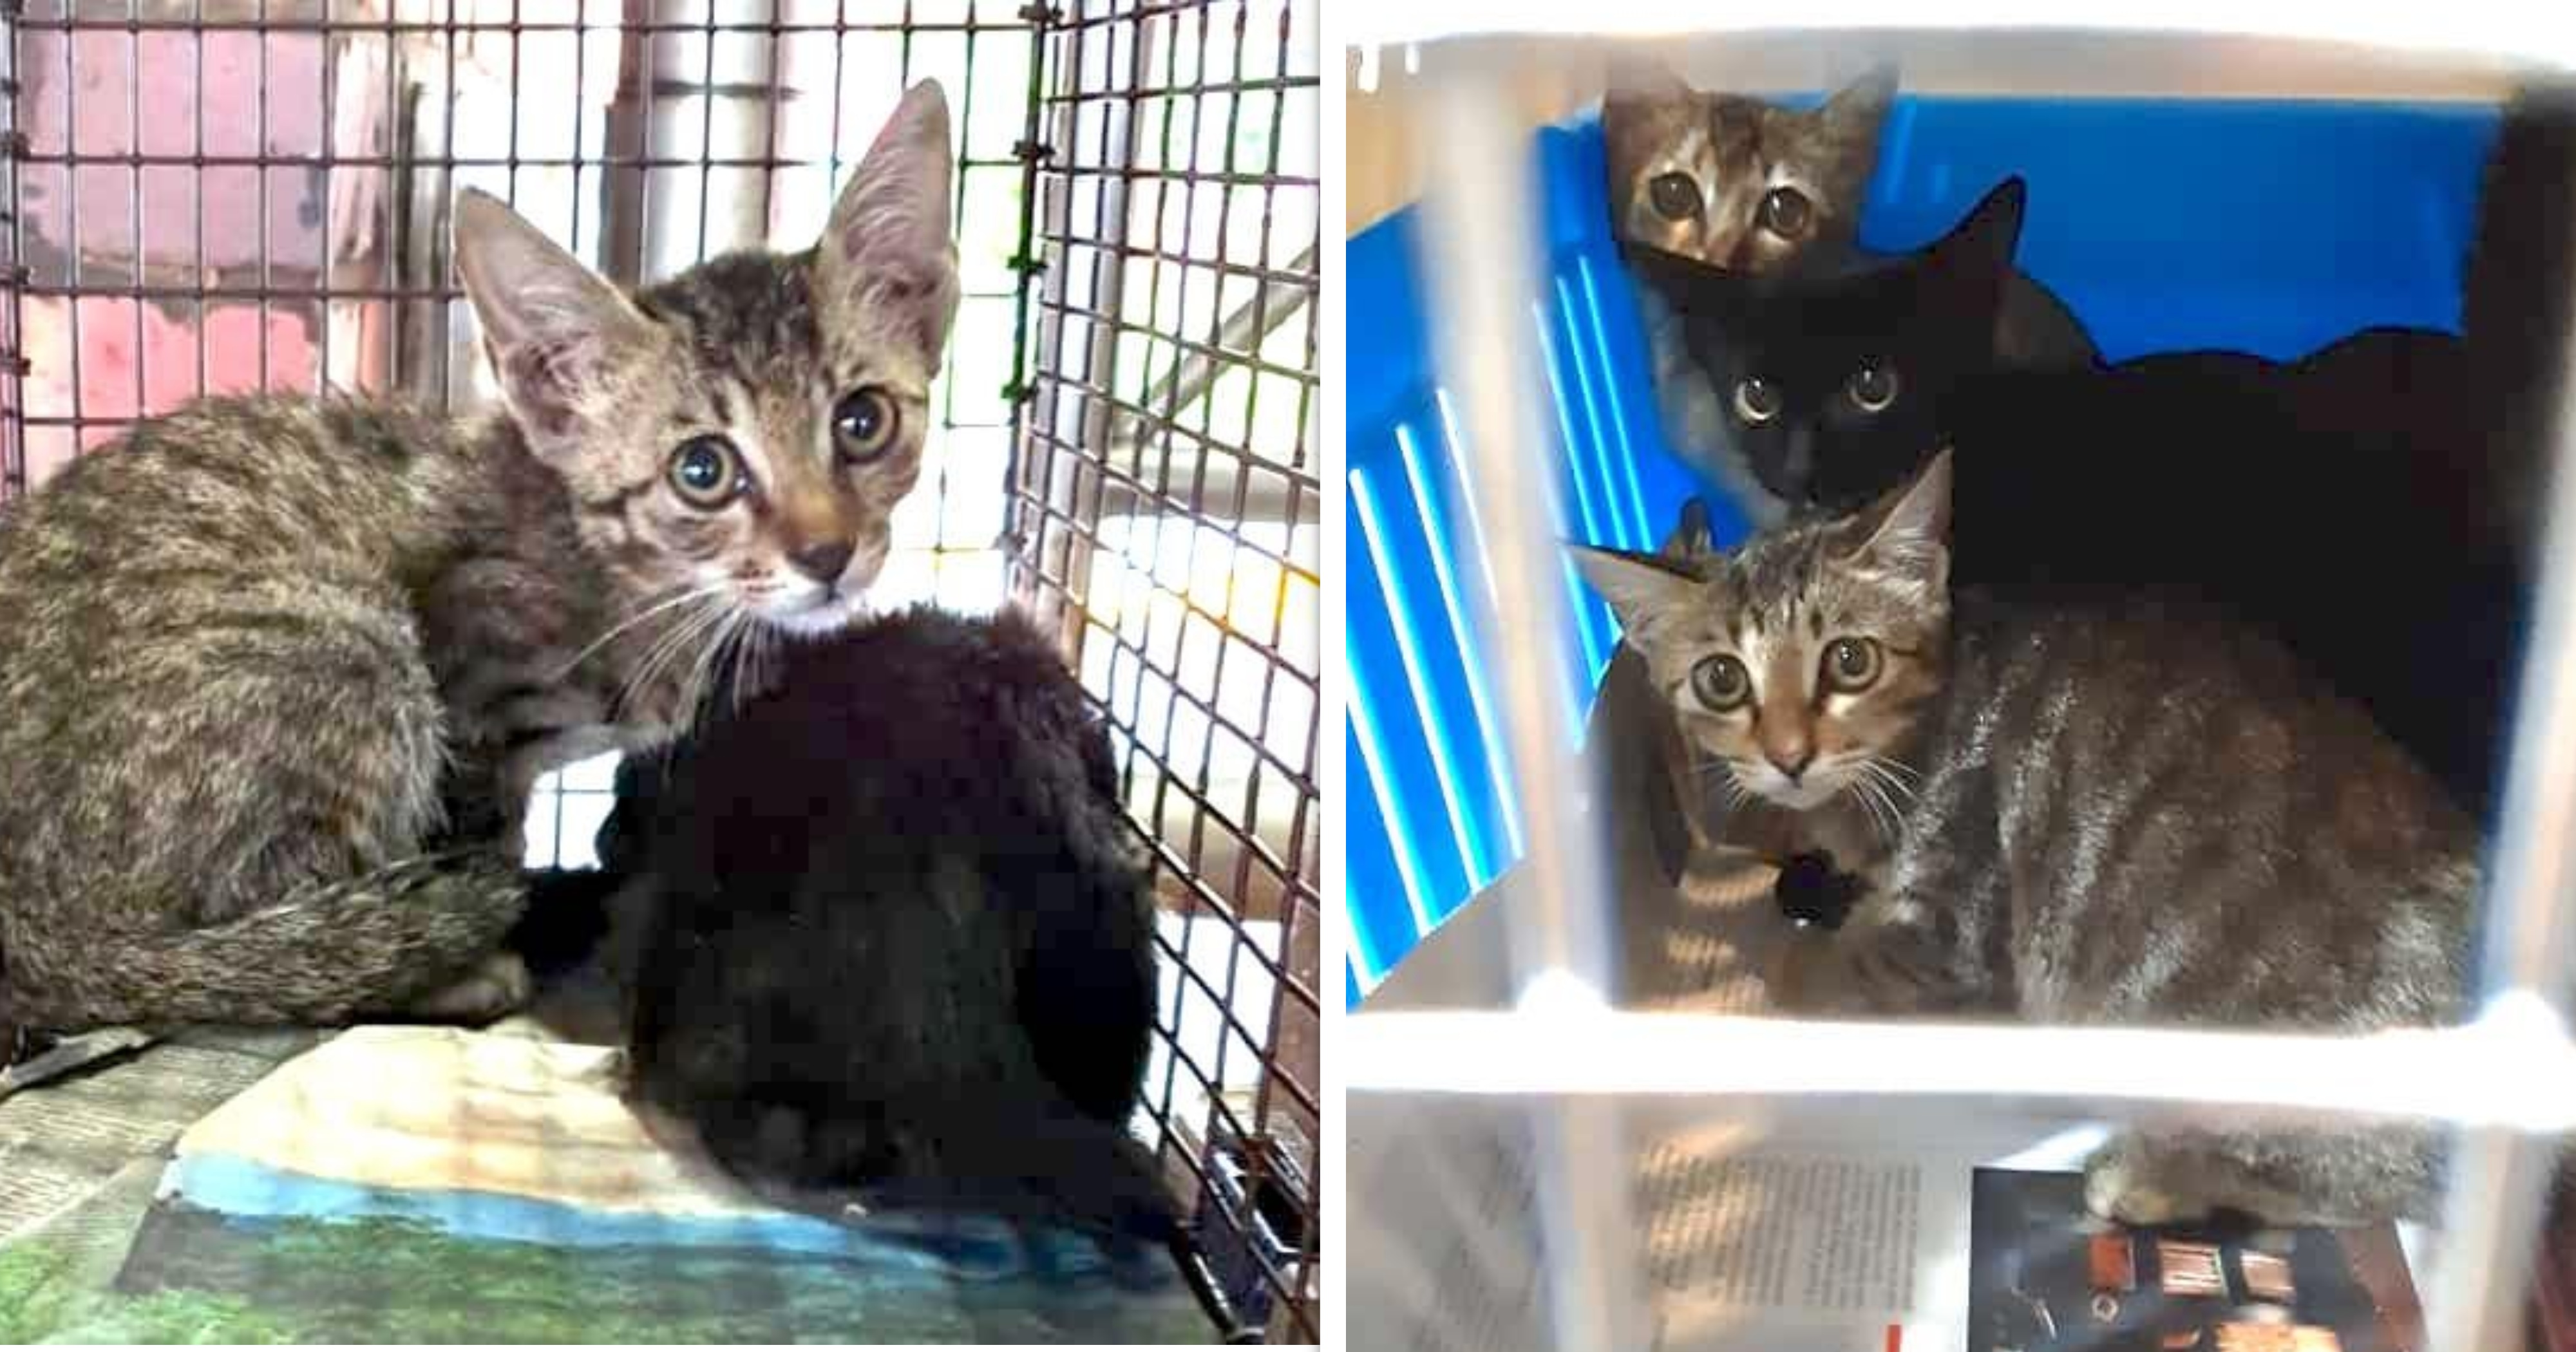 6 rescue kittens in S'pore have been living in pet carriers for 4 days